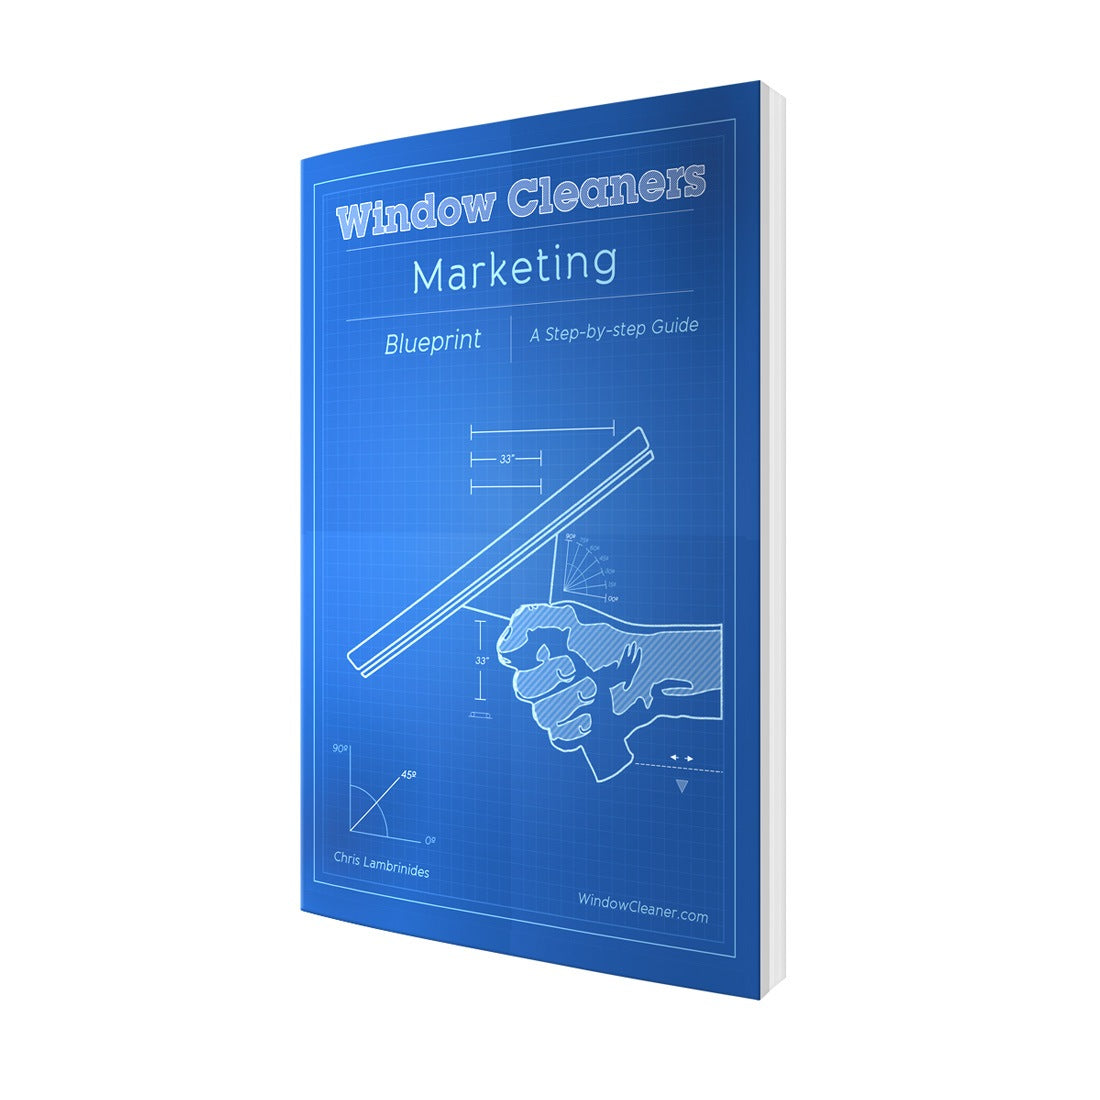 The Window Cleaners Marketing Blueprint Product View